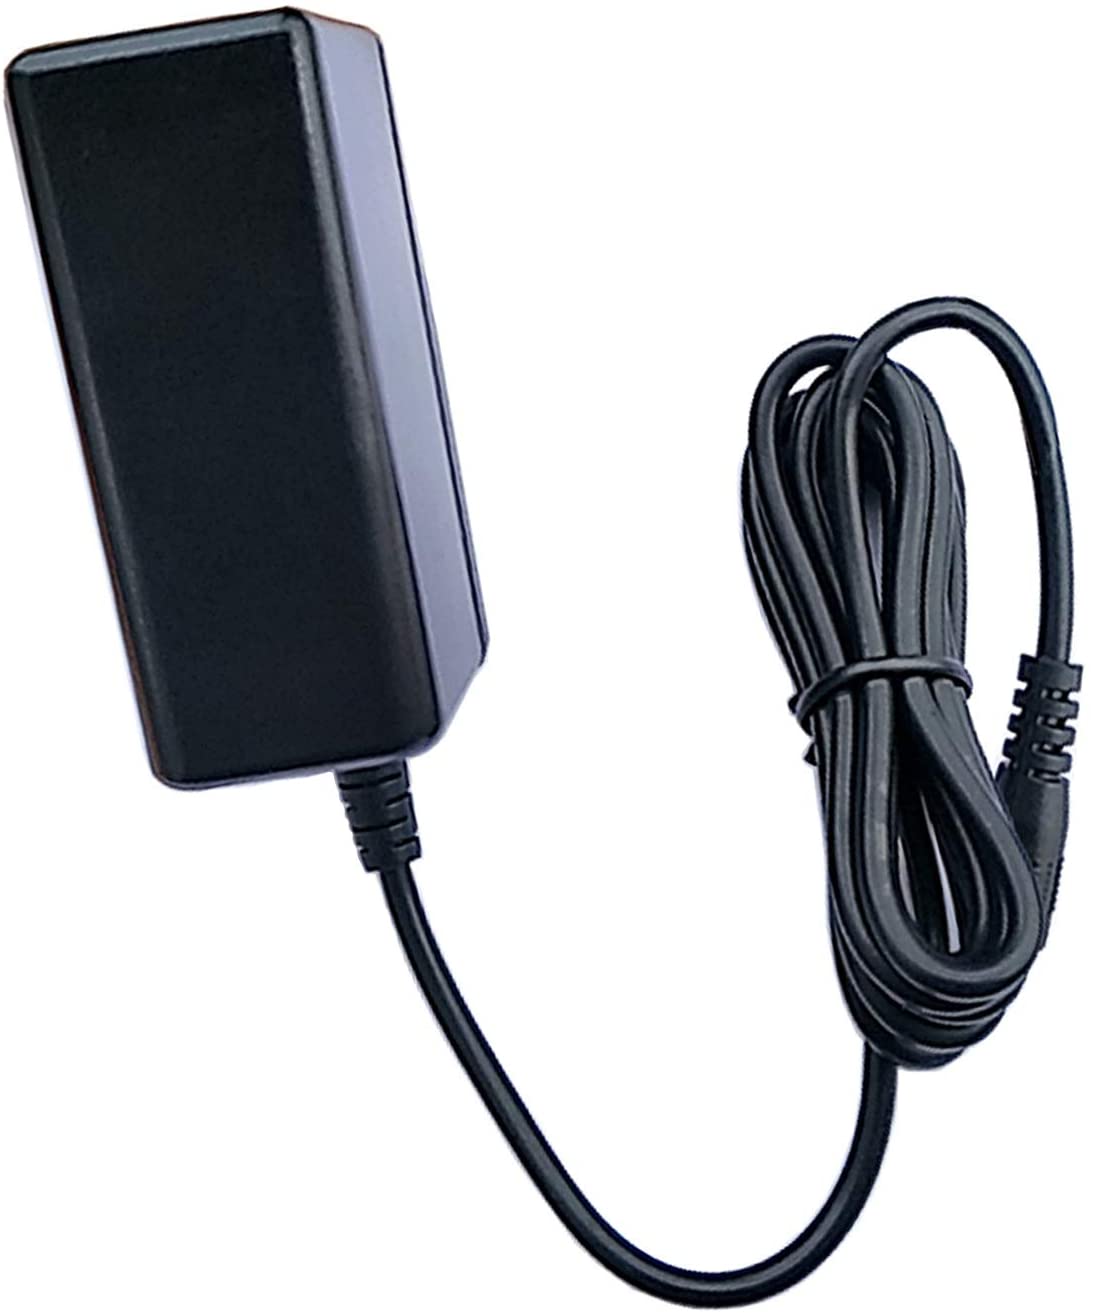 UPBRIGHT AC Adapter For NordicTrack AUDIOSTRIDER 800 Elliptical Exerciser 831.236670 831.236671 831.236672 831.236673 NTEL77060 NTEL77061 NTEL77062 Power Supply Cord + Charger - image 3 of 3